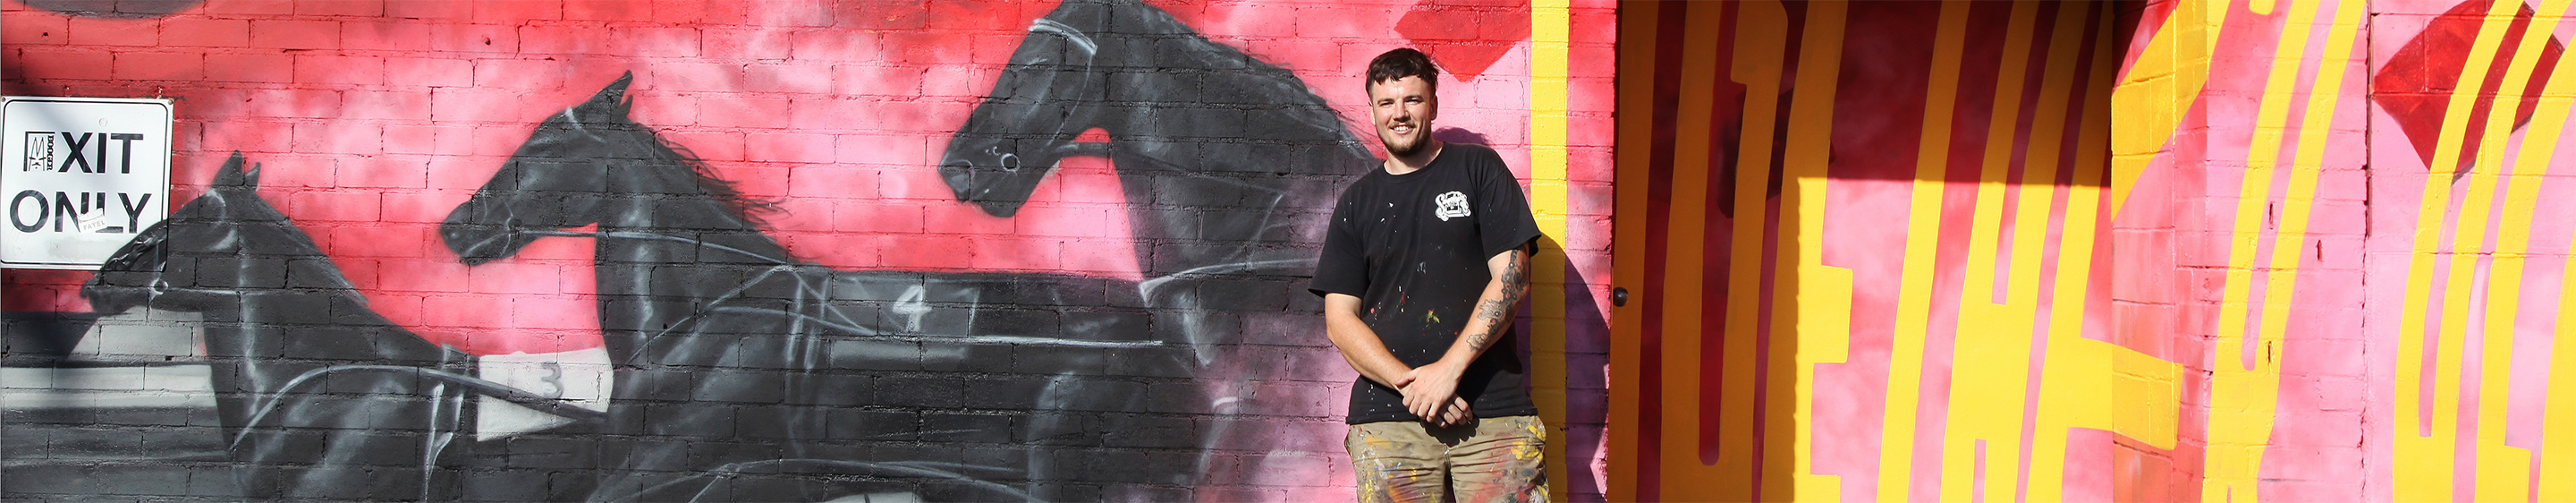 A smiling man with clothes covered in paint stands in front of a bright artwork featuring three black racing horses painted on an industrial building.